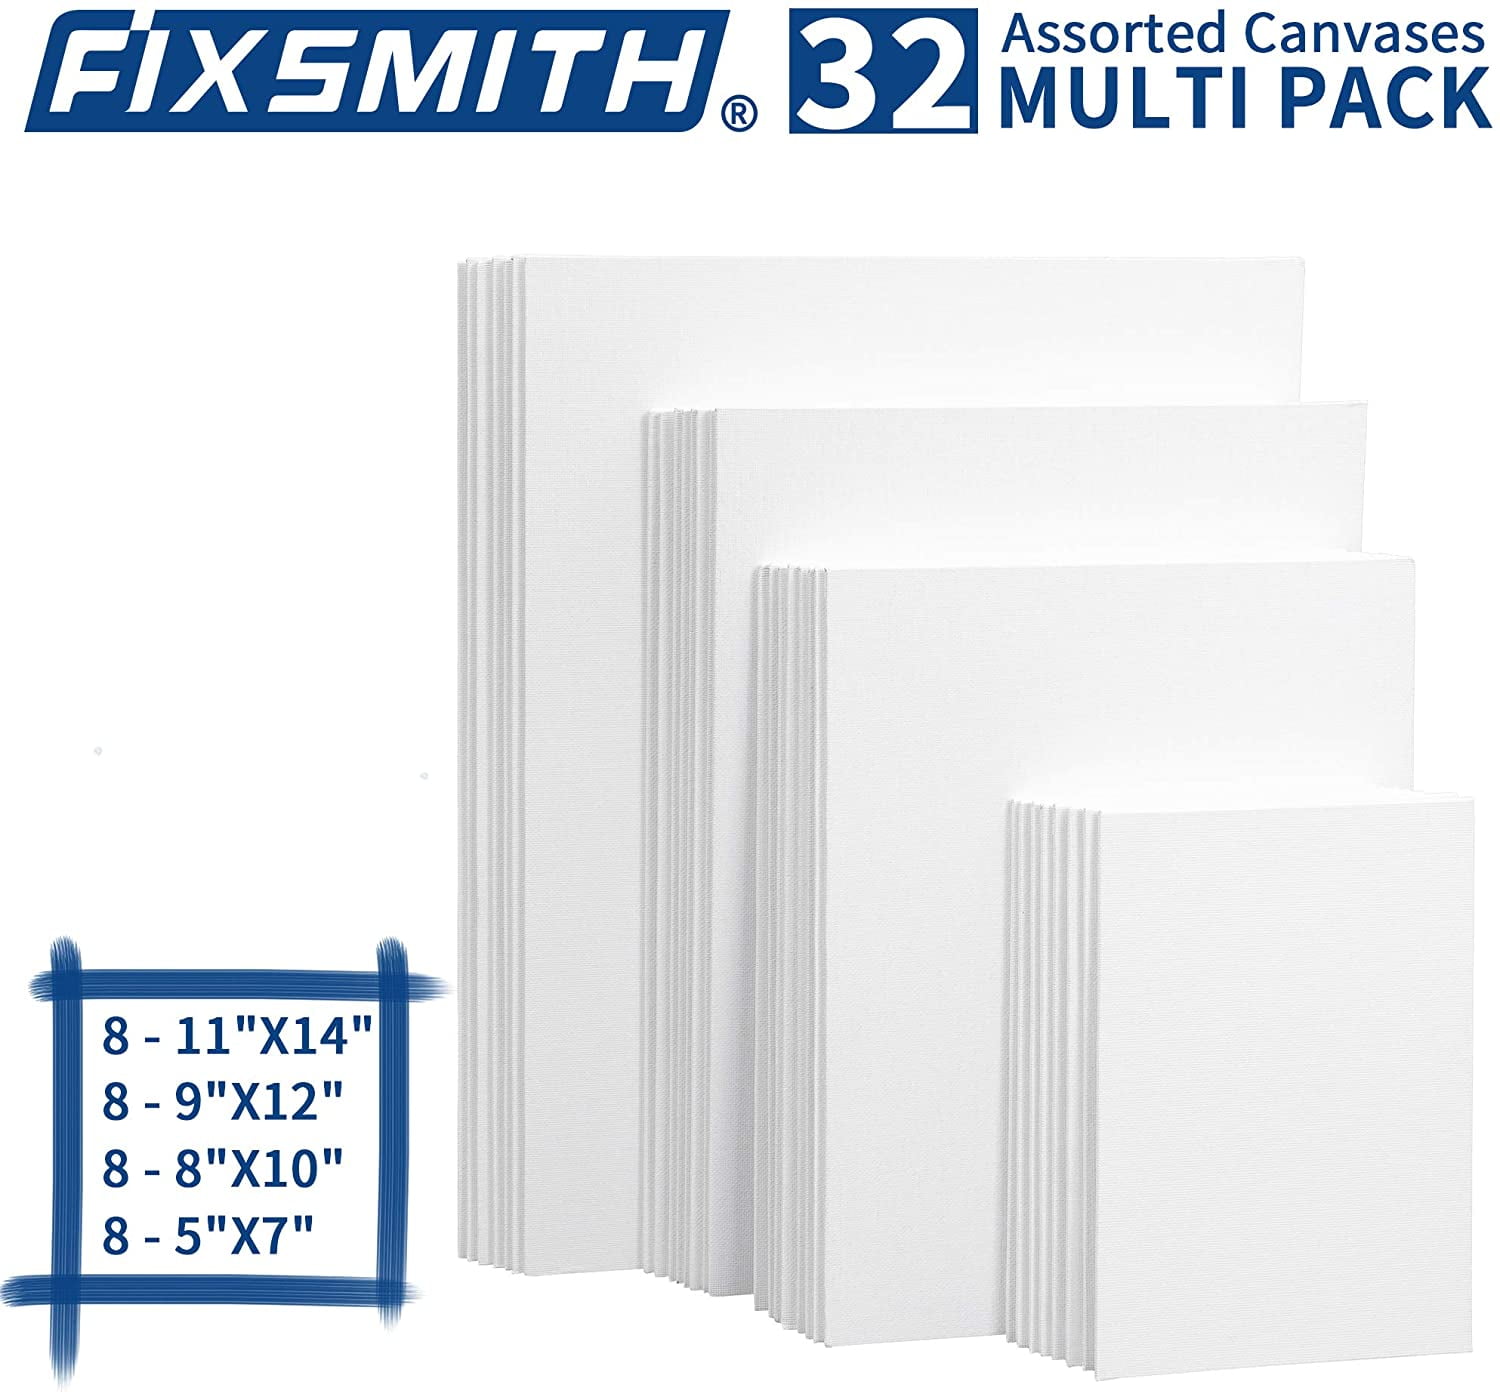  FIXSMITH Canvases for Painting, 11x14 Inch Canvas Boards, Super  Value 12 Pack White Blank Canvas Panels, 100% Cotton Primed，Painting Art  Supplies for Professionals, Hobby Painters, Students & Kids